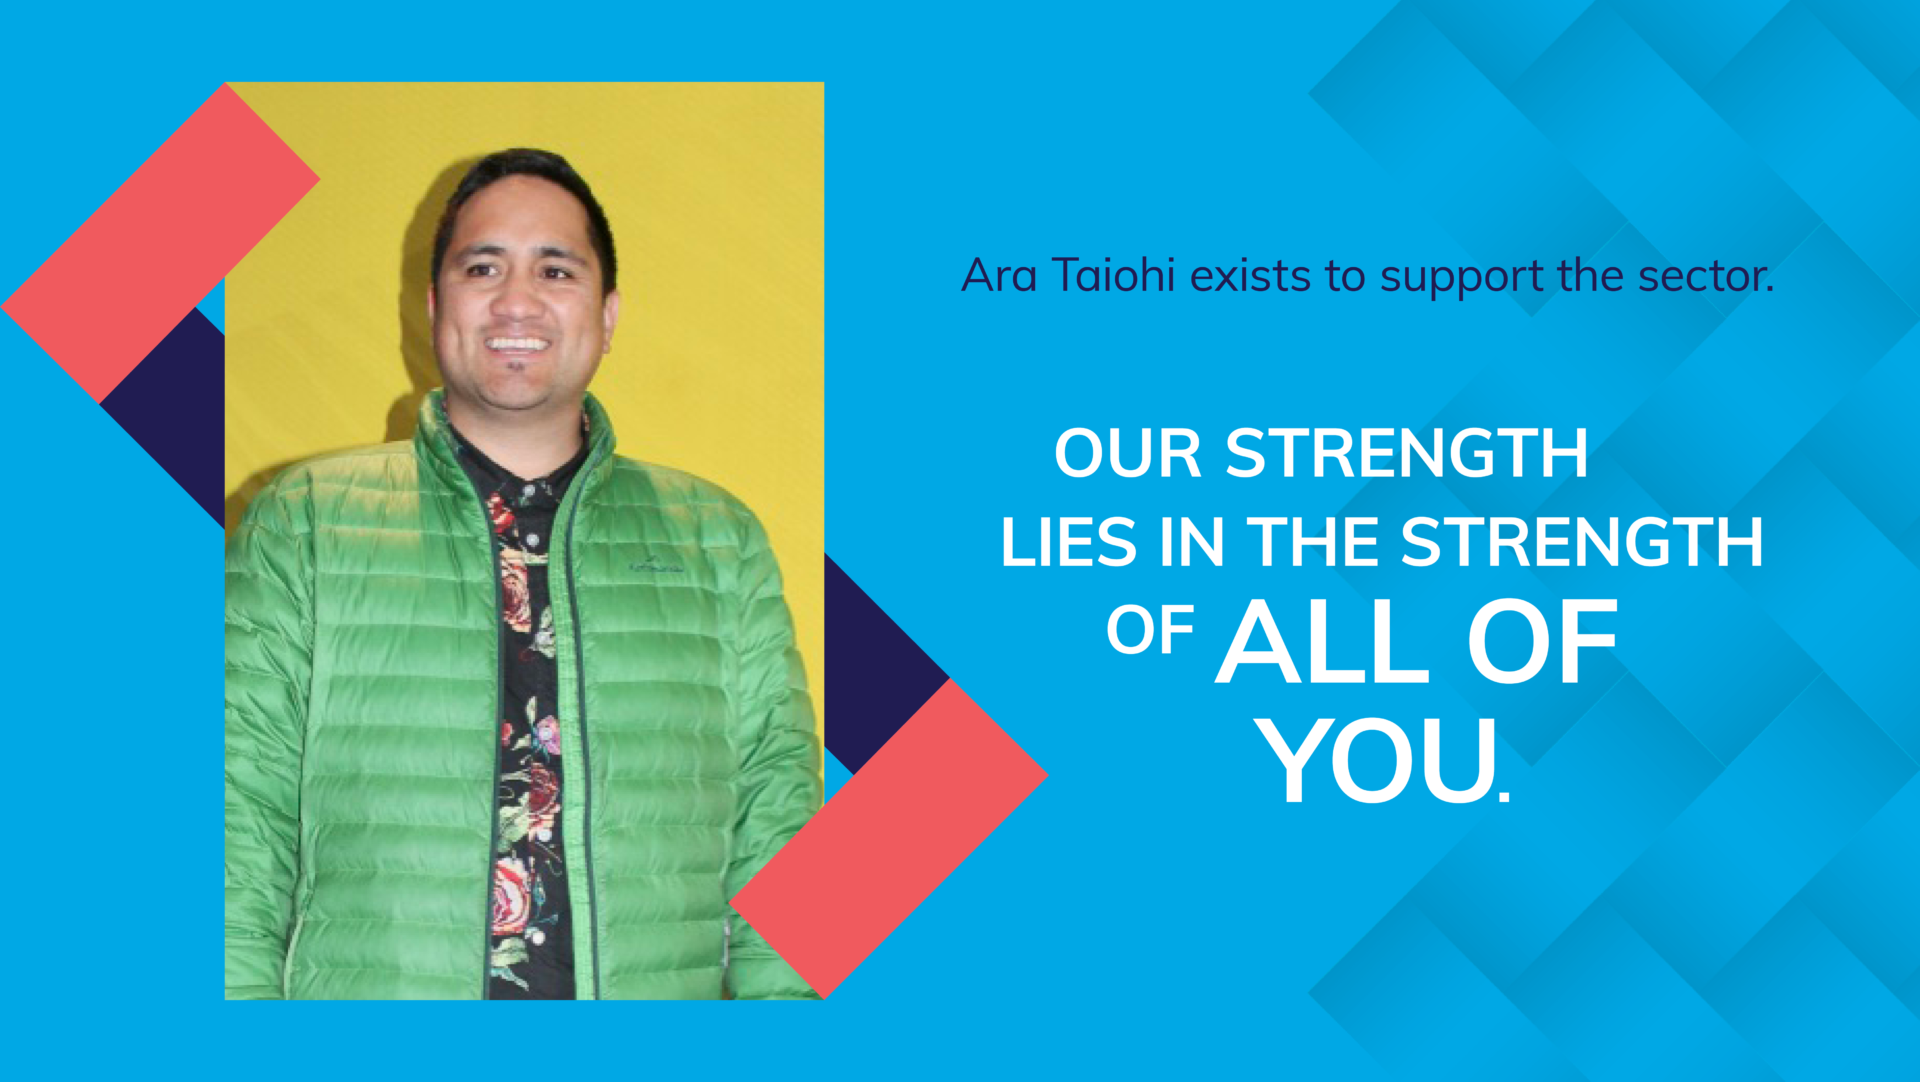 Ara Taiohi exists to support the sector. Our strength lies in the strength of all of you.